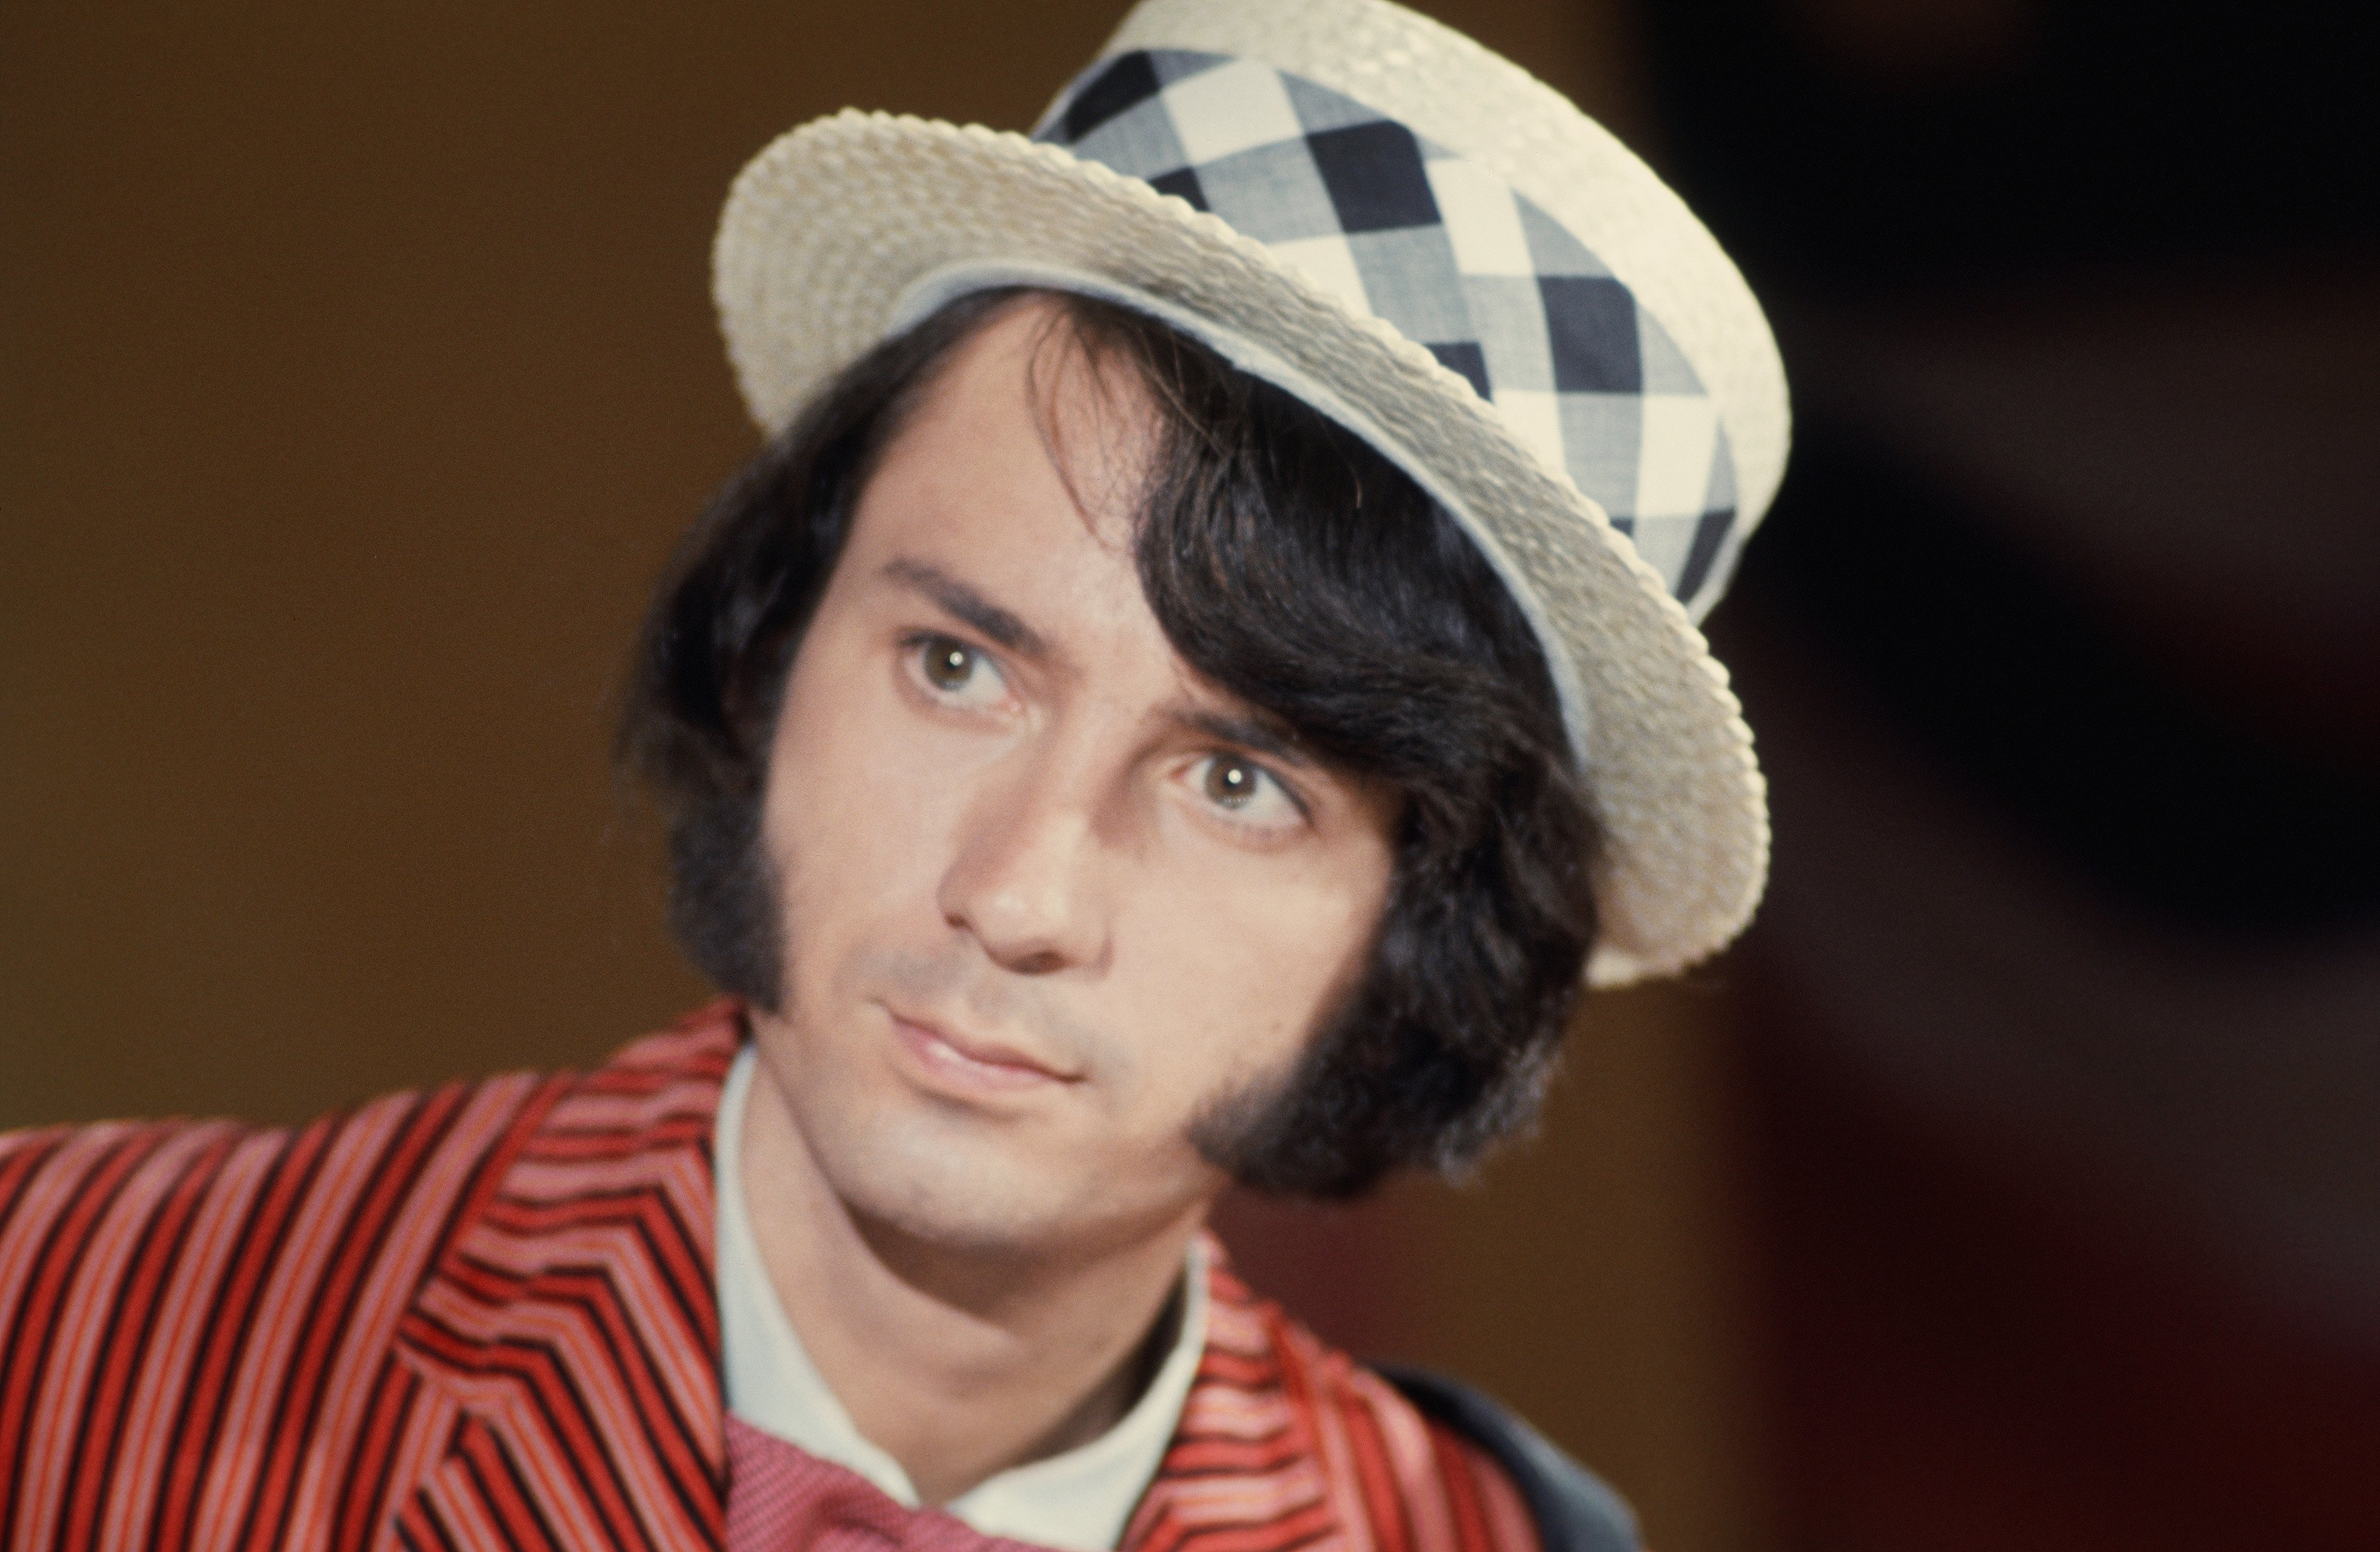 Mike Nesmith of The Monkees wearing a hat